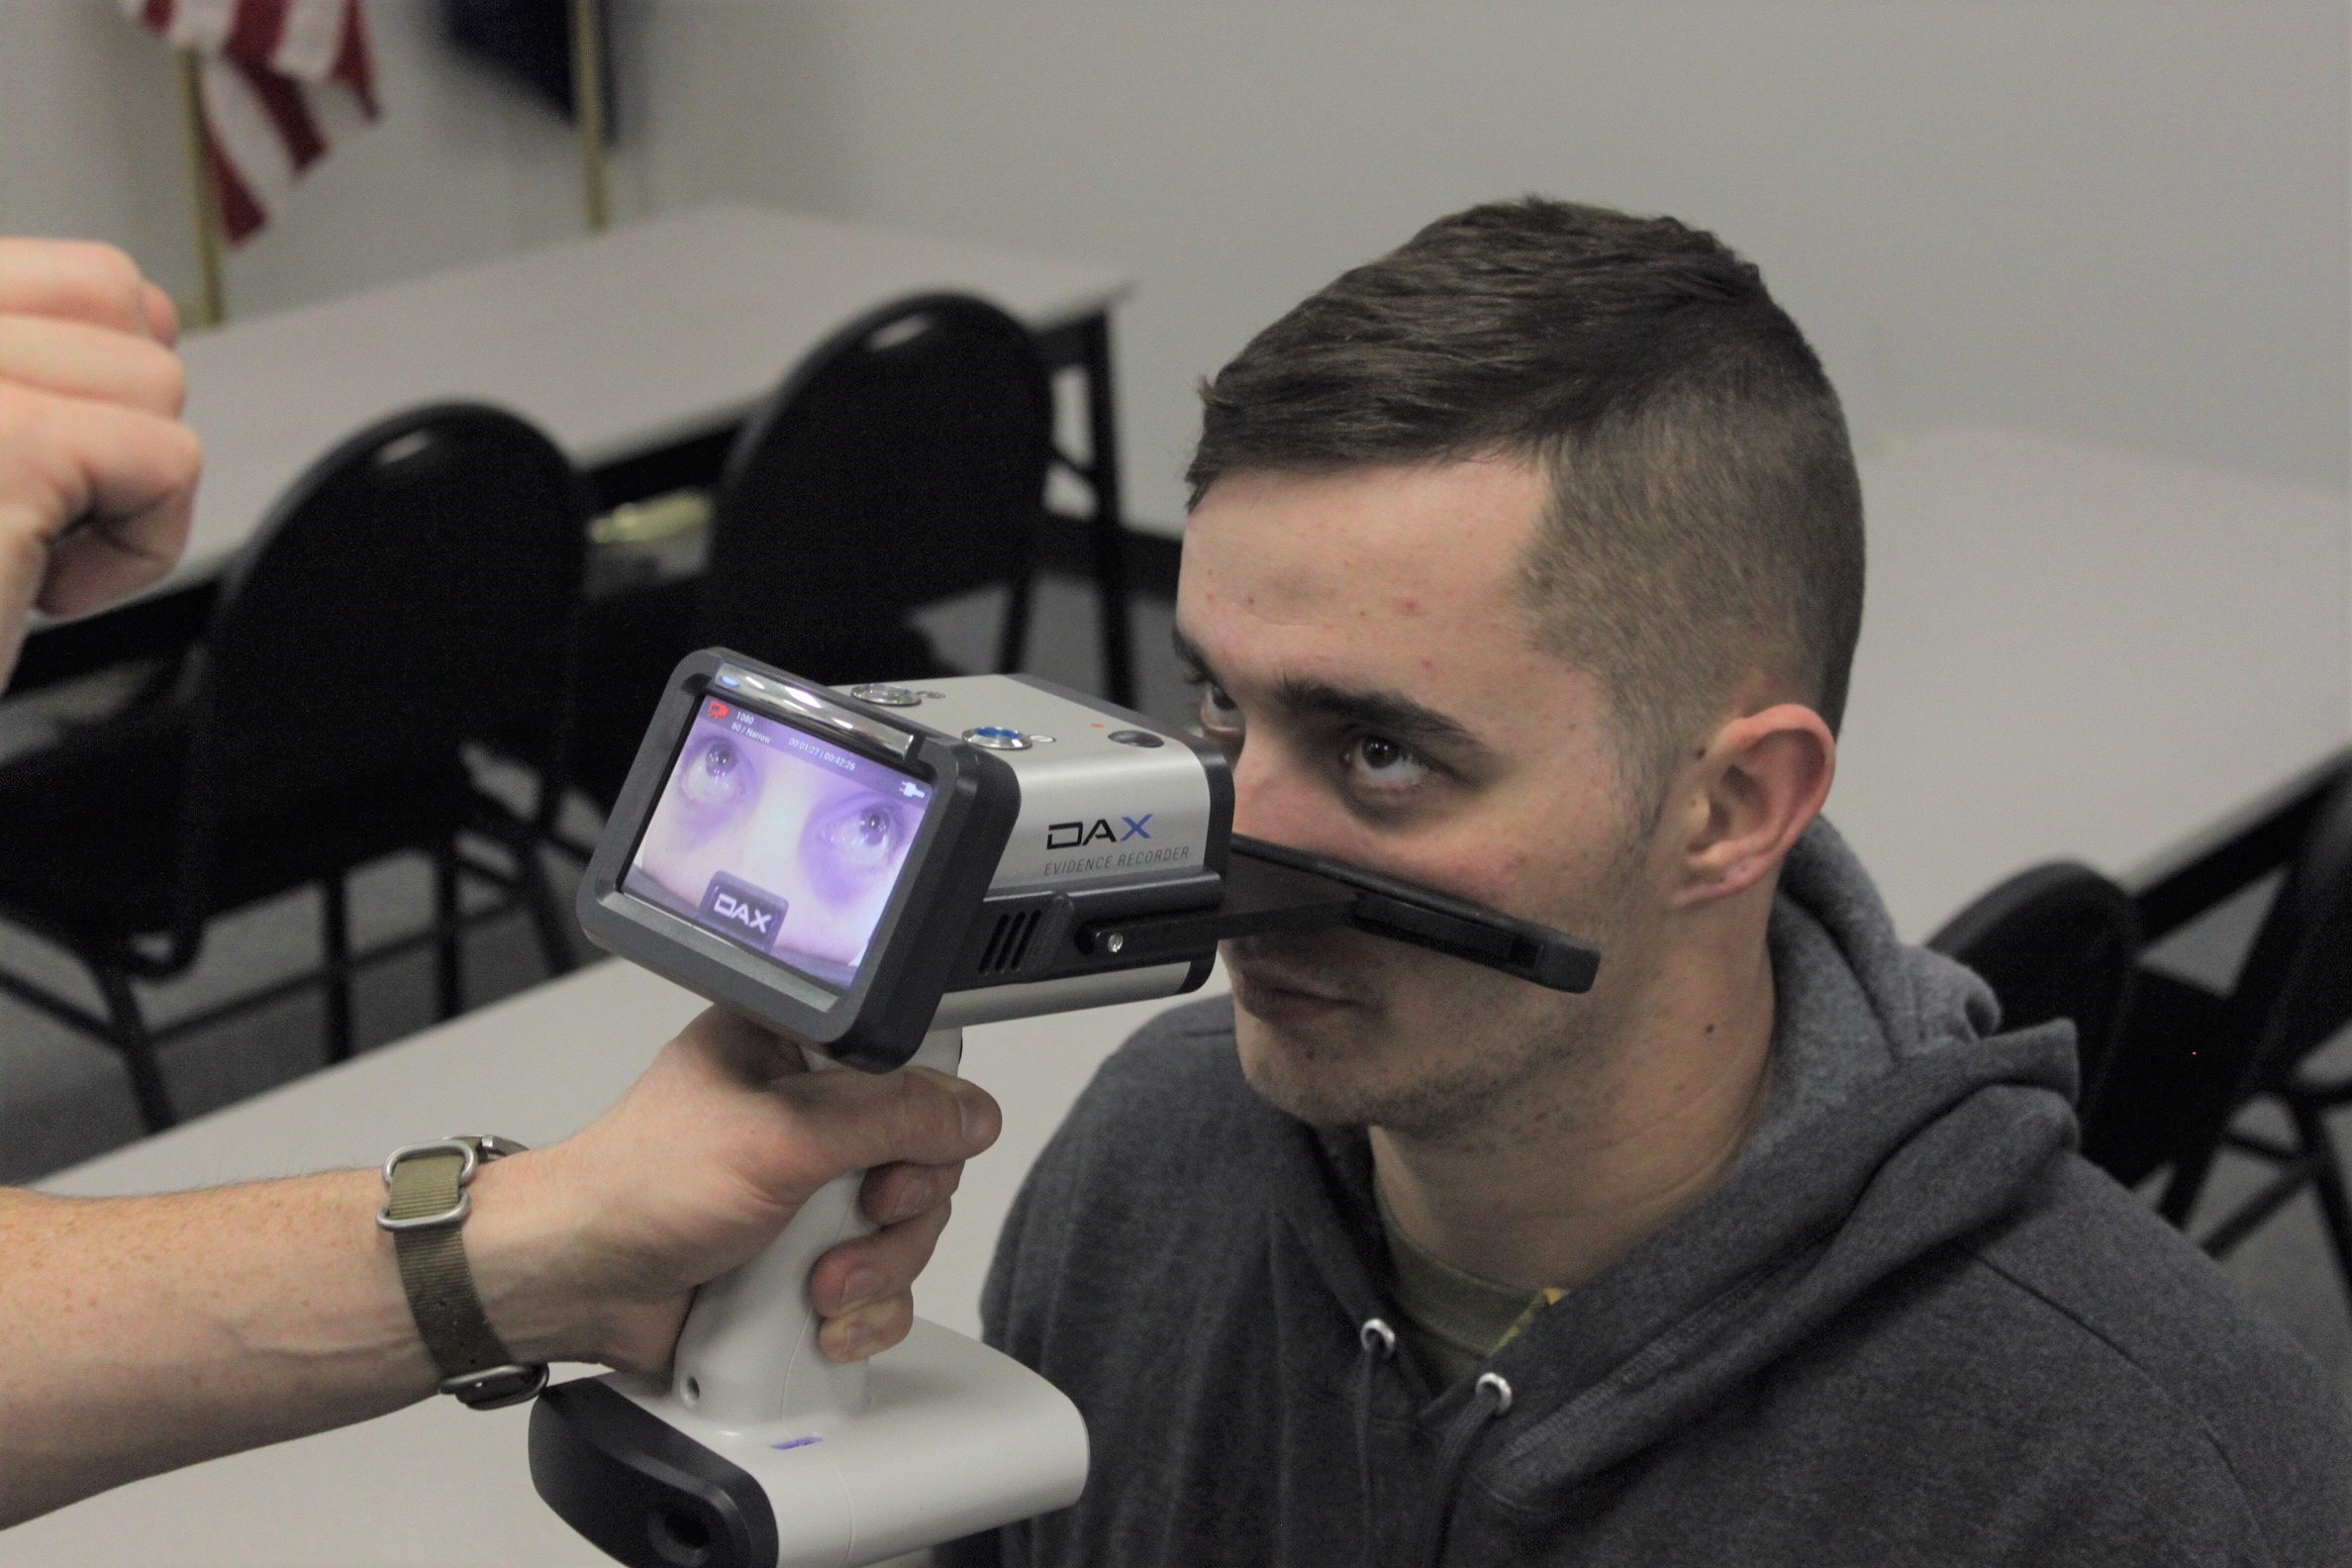 Testing DAX recorder. Recorder is placed on face below the eyes of the person. It has a small screen that the officer can view the recording on.